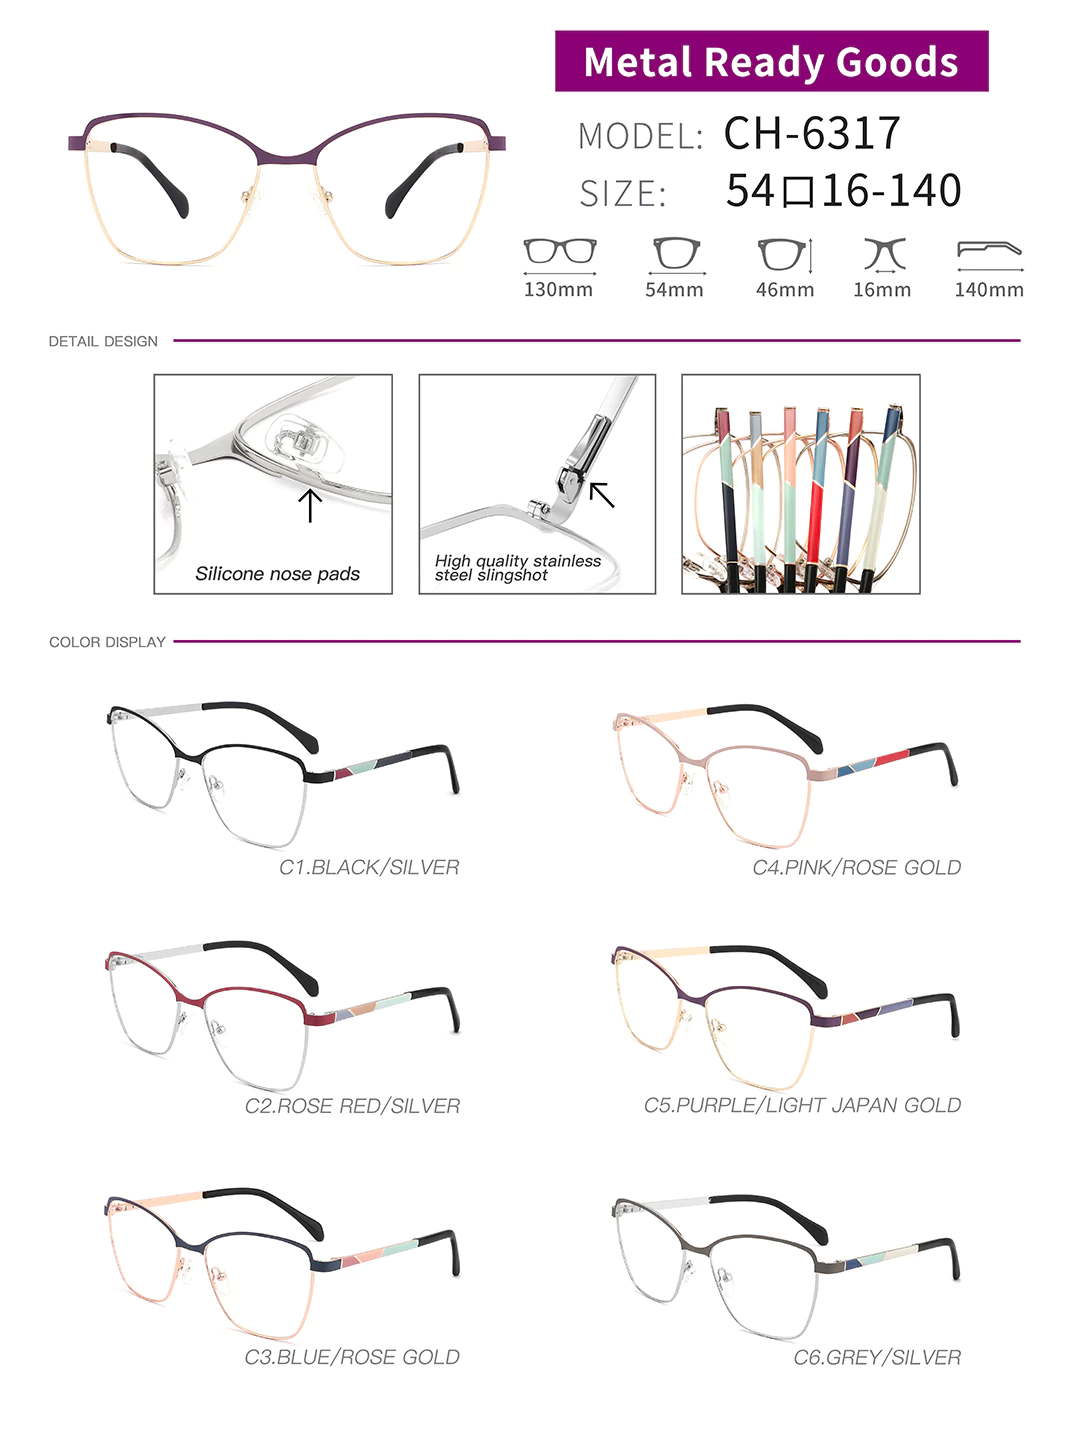 3D printed glasses CH-6317 in different colors, sizes and detail shots